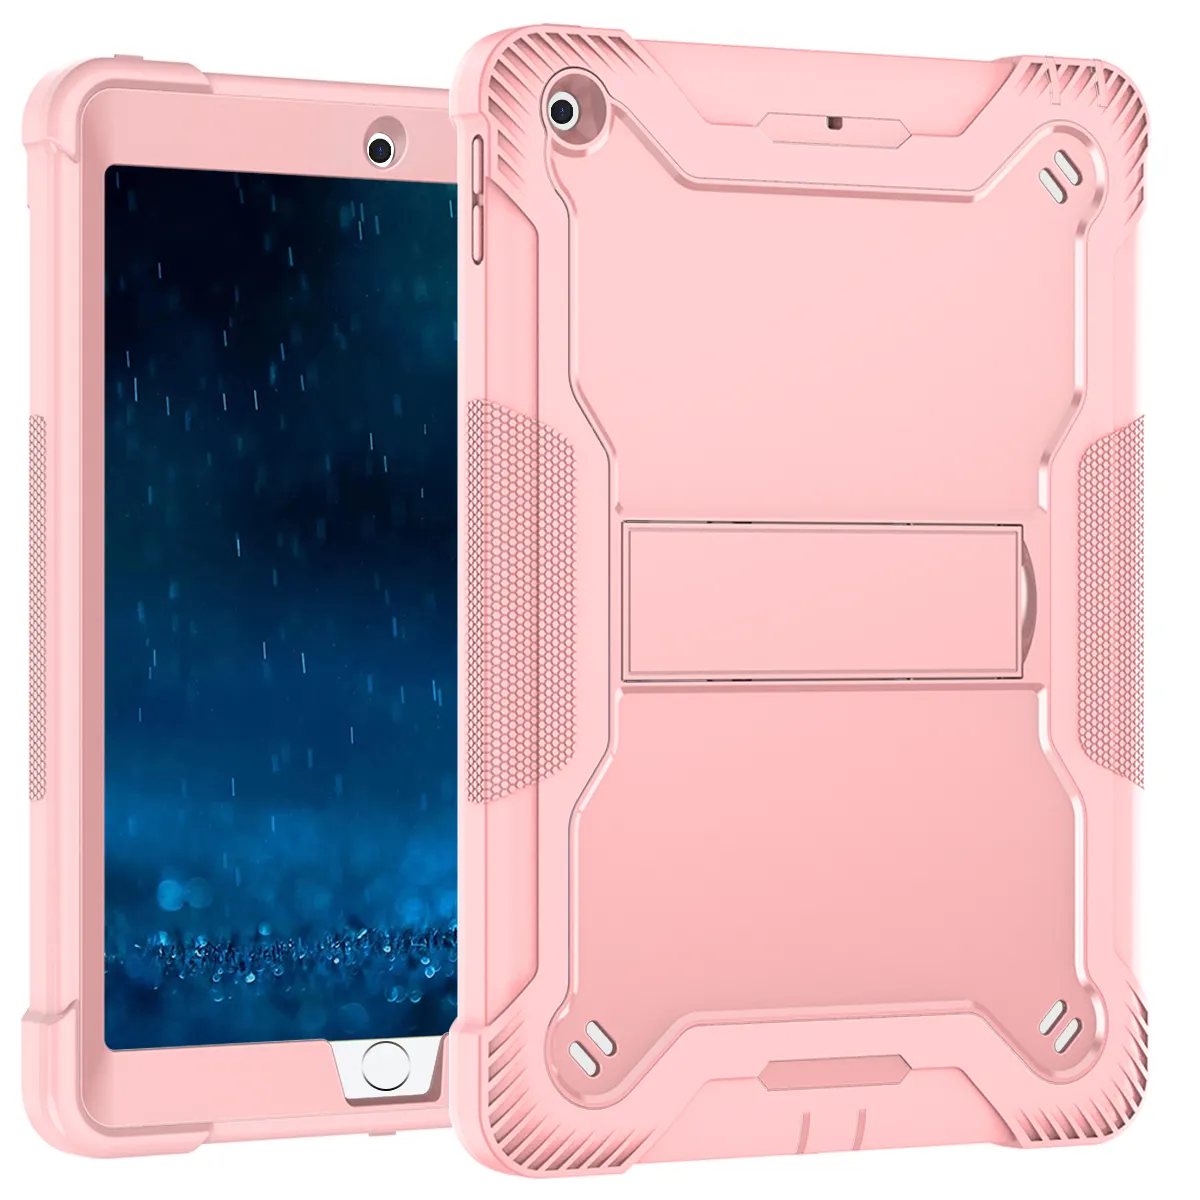 Screen Protector Detachable Kickstand Shockproof Silicone Bumper Pc Hybrid Rugged 9.7 Inch Tablet Case For Ipad 2 3 4 Back Cover